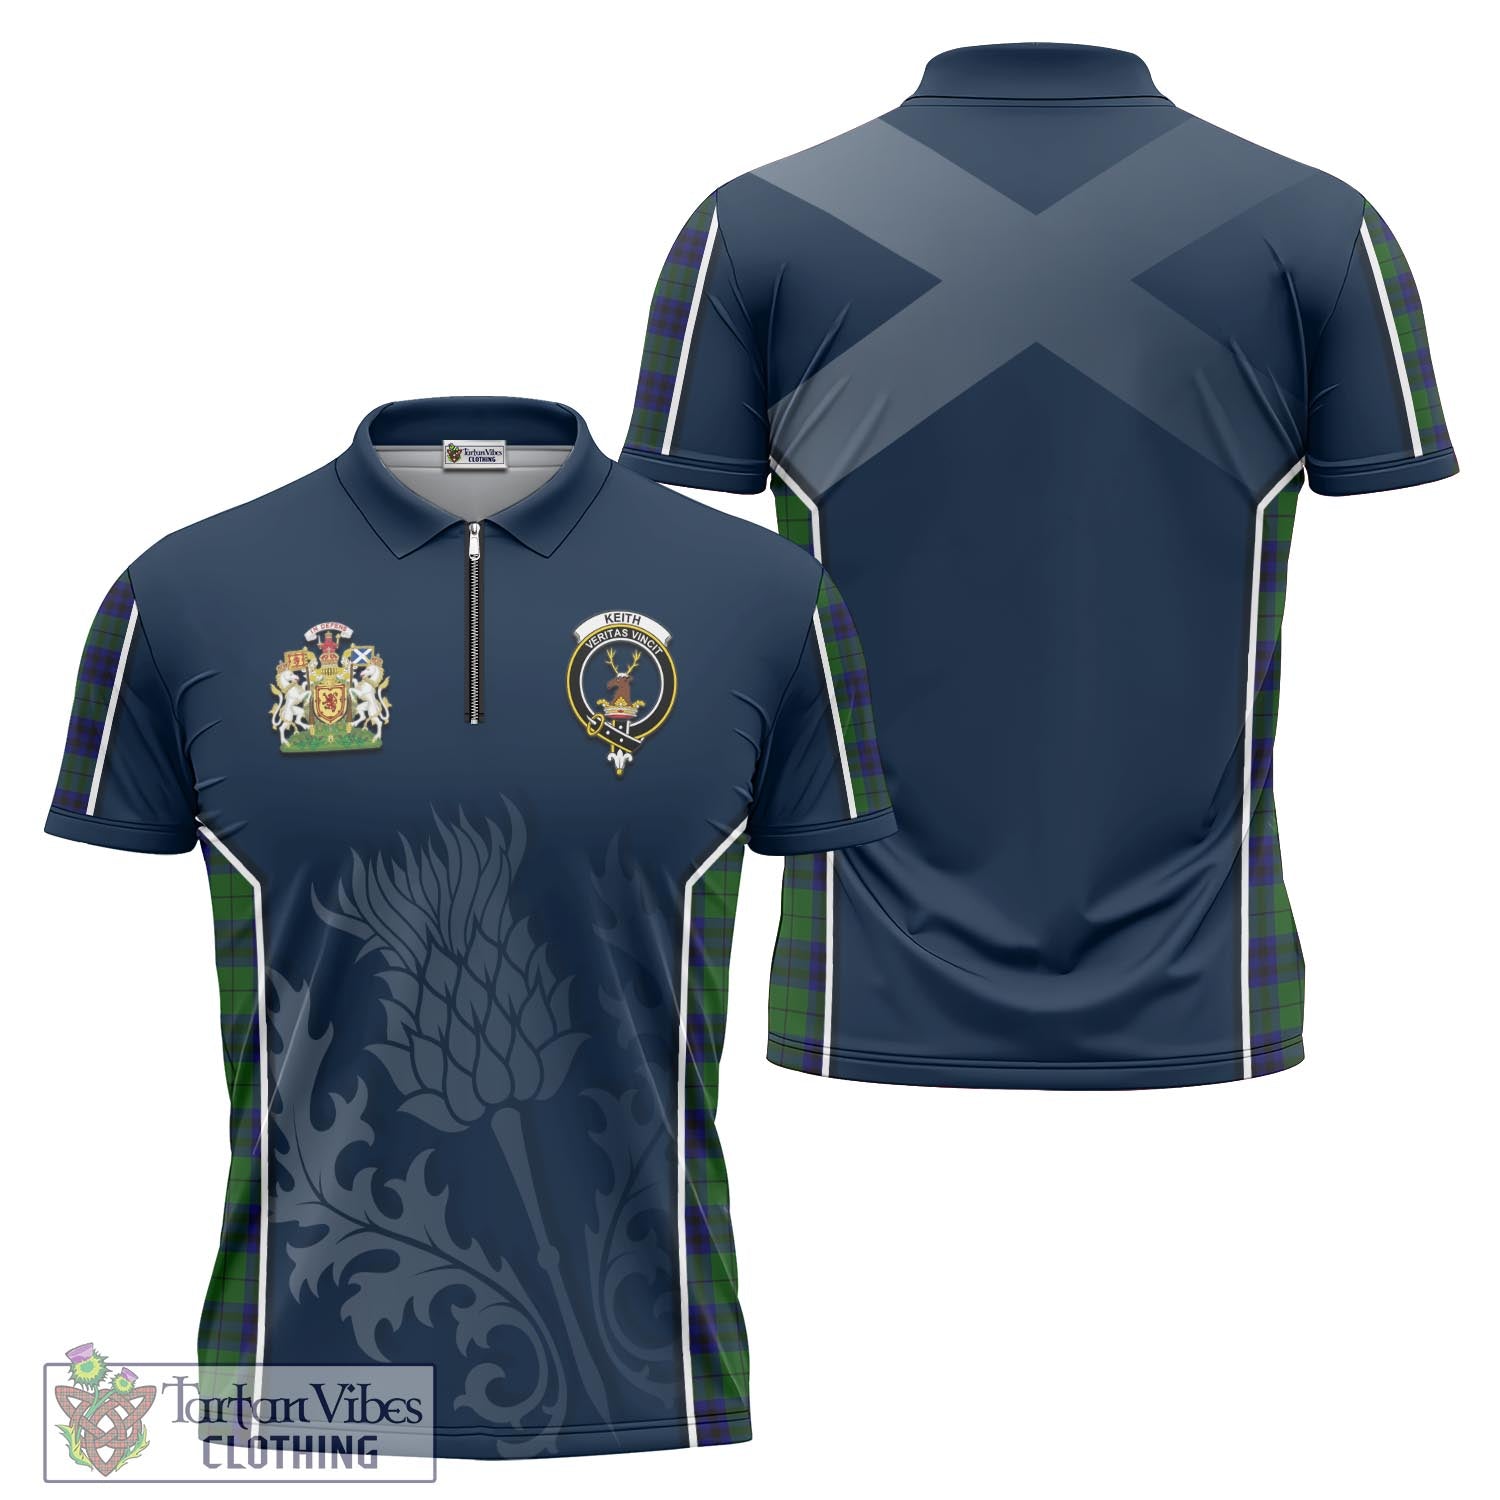 Tartan Vibes Clothing Keith Modern Tartan Zipper Polo Shirt with Family Crest and Scottish Thistle Vibes Sport Style